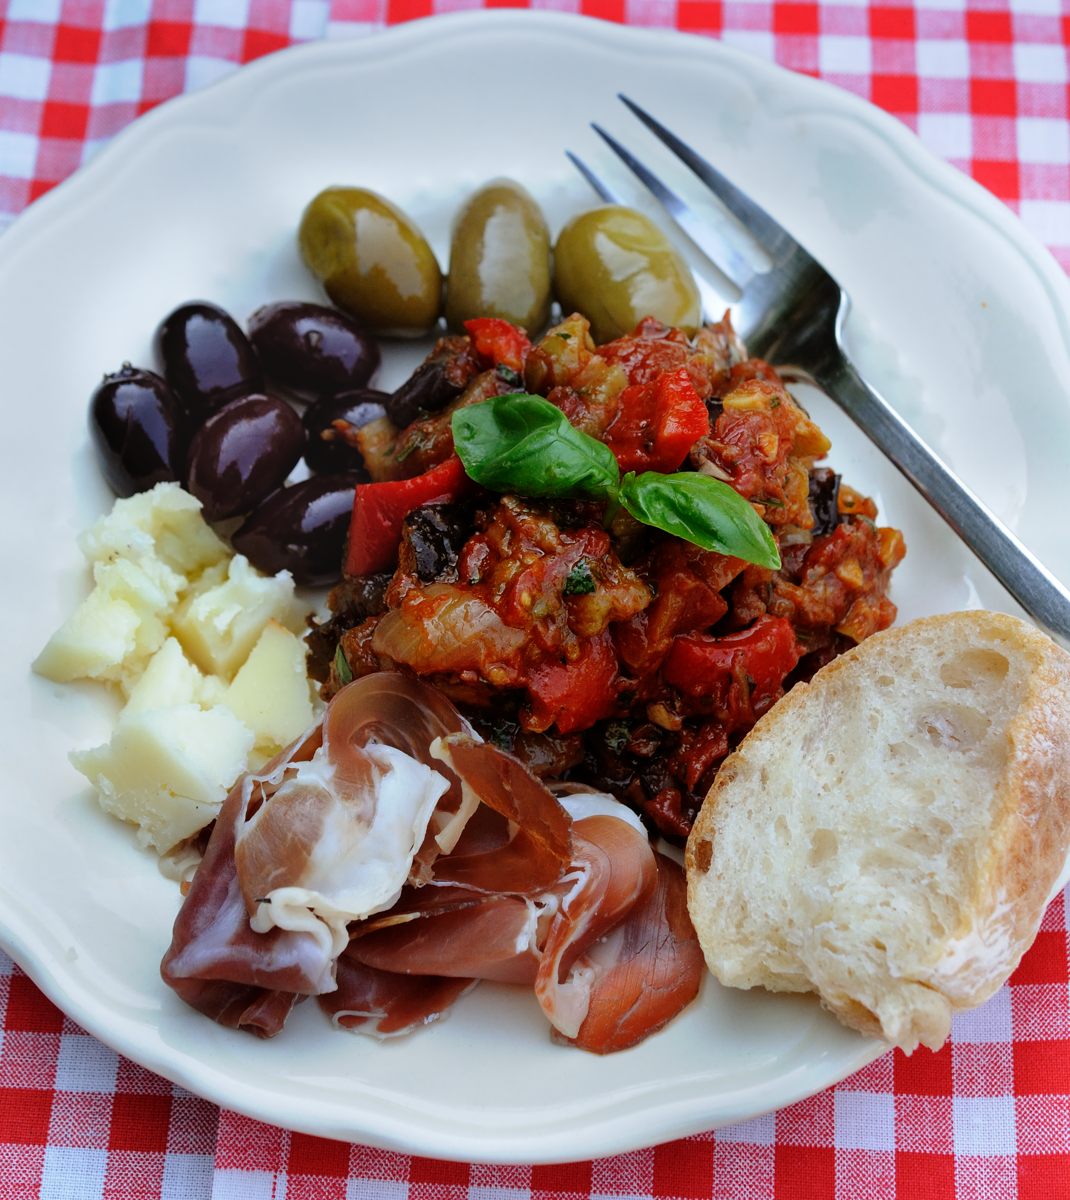 Caponata Sweet & Sour Eggplant Appetizer with Olives, Cheese & Proscuitto